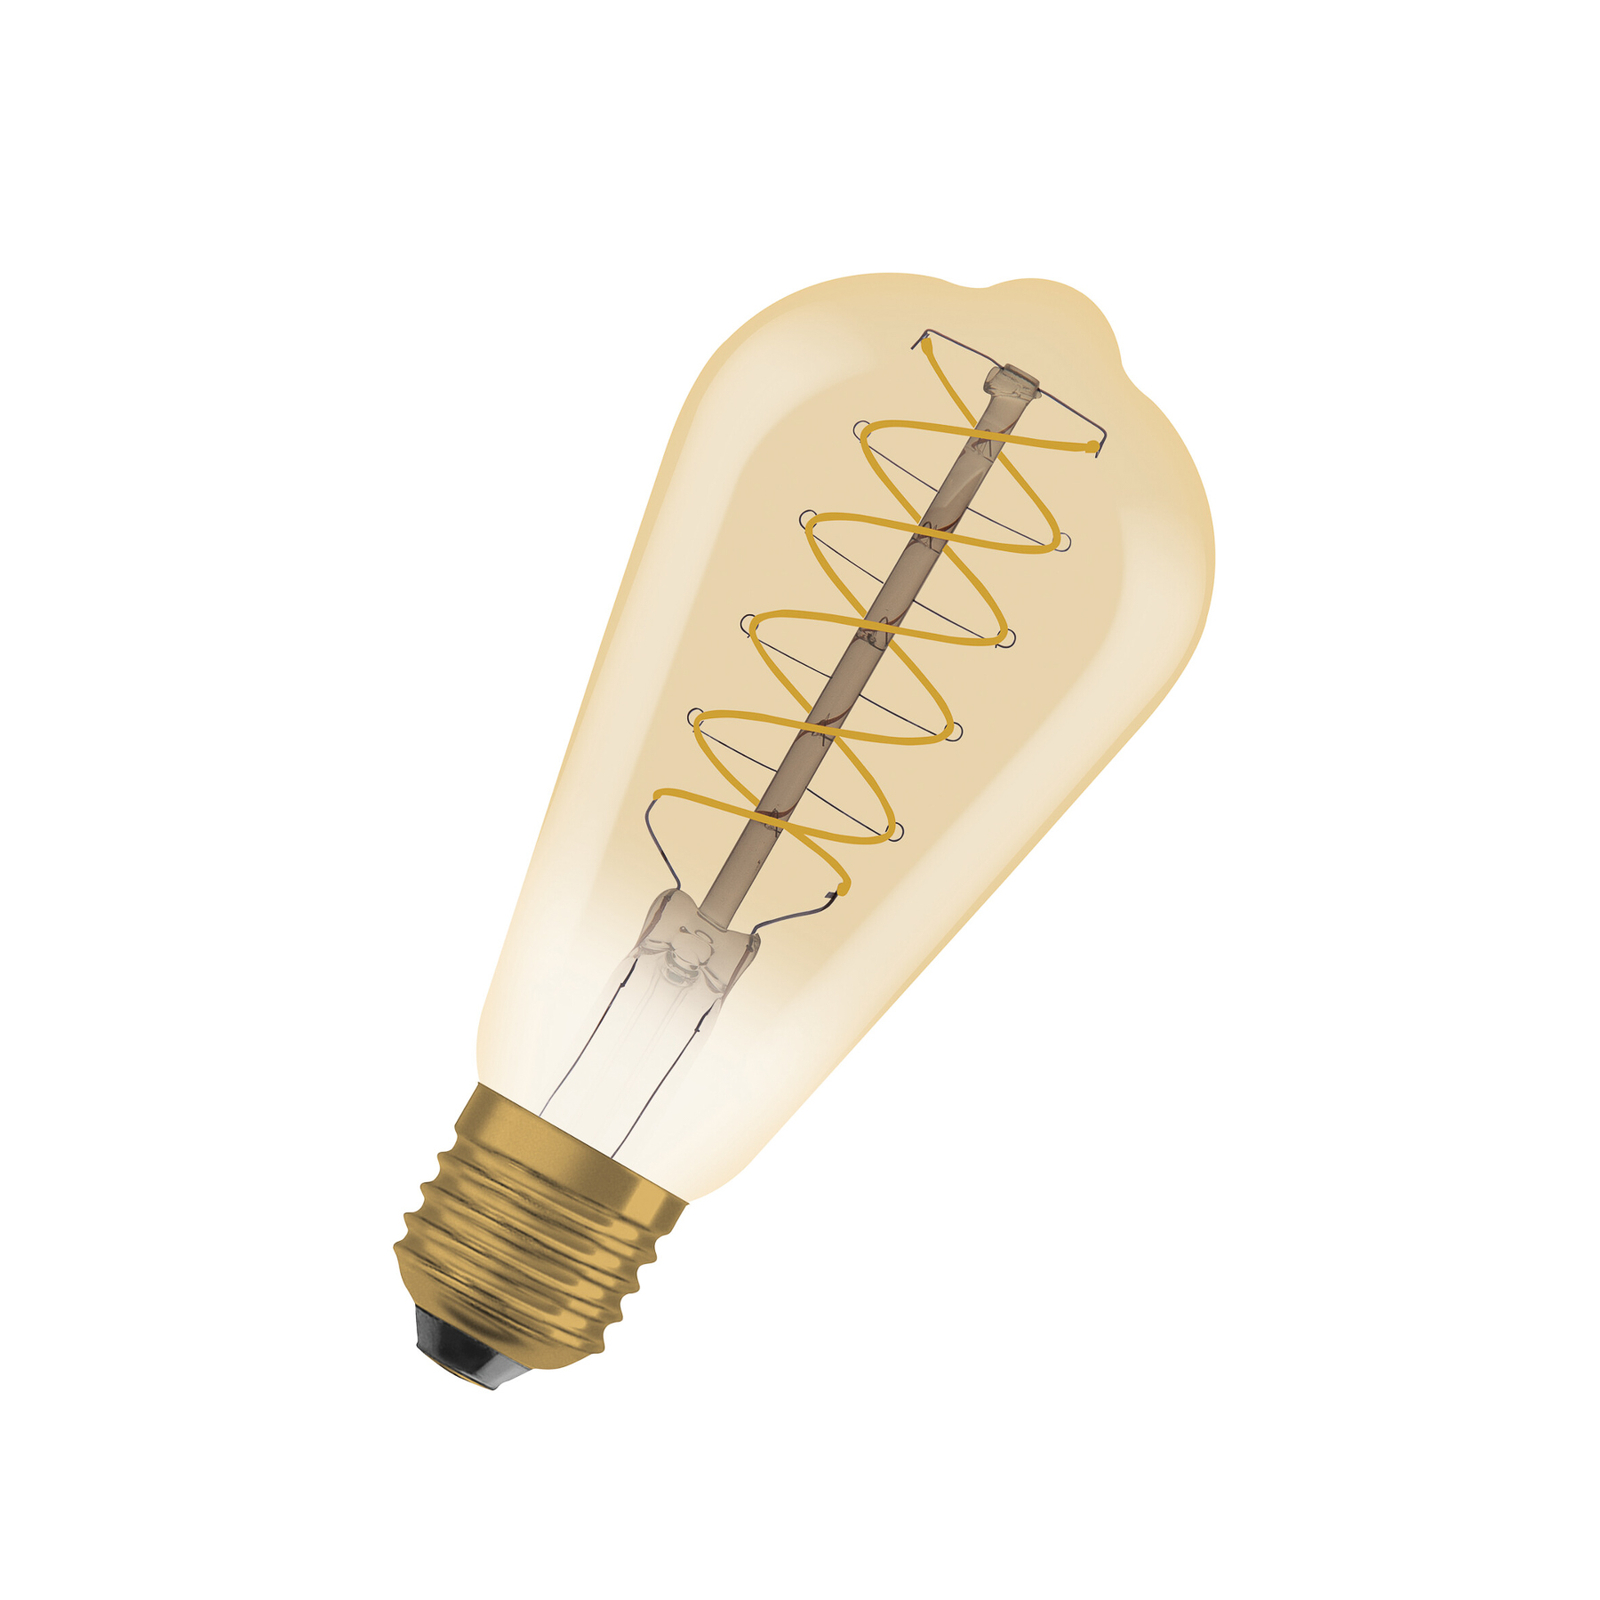 OSRAM LED Vintage 1906 Edison, gold, E27, 4.8 W, 822, dimmable.